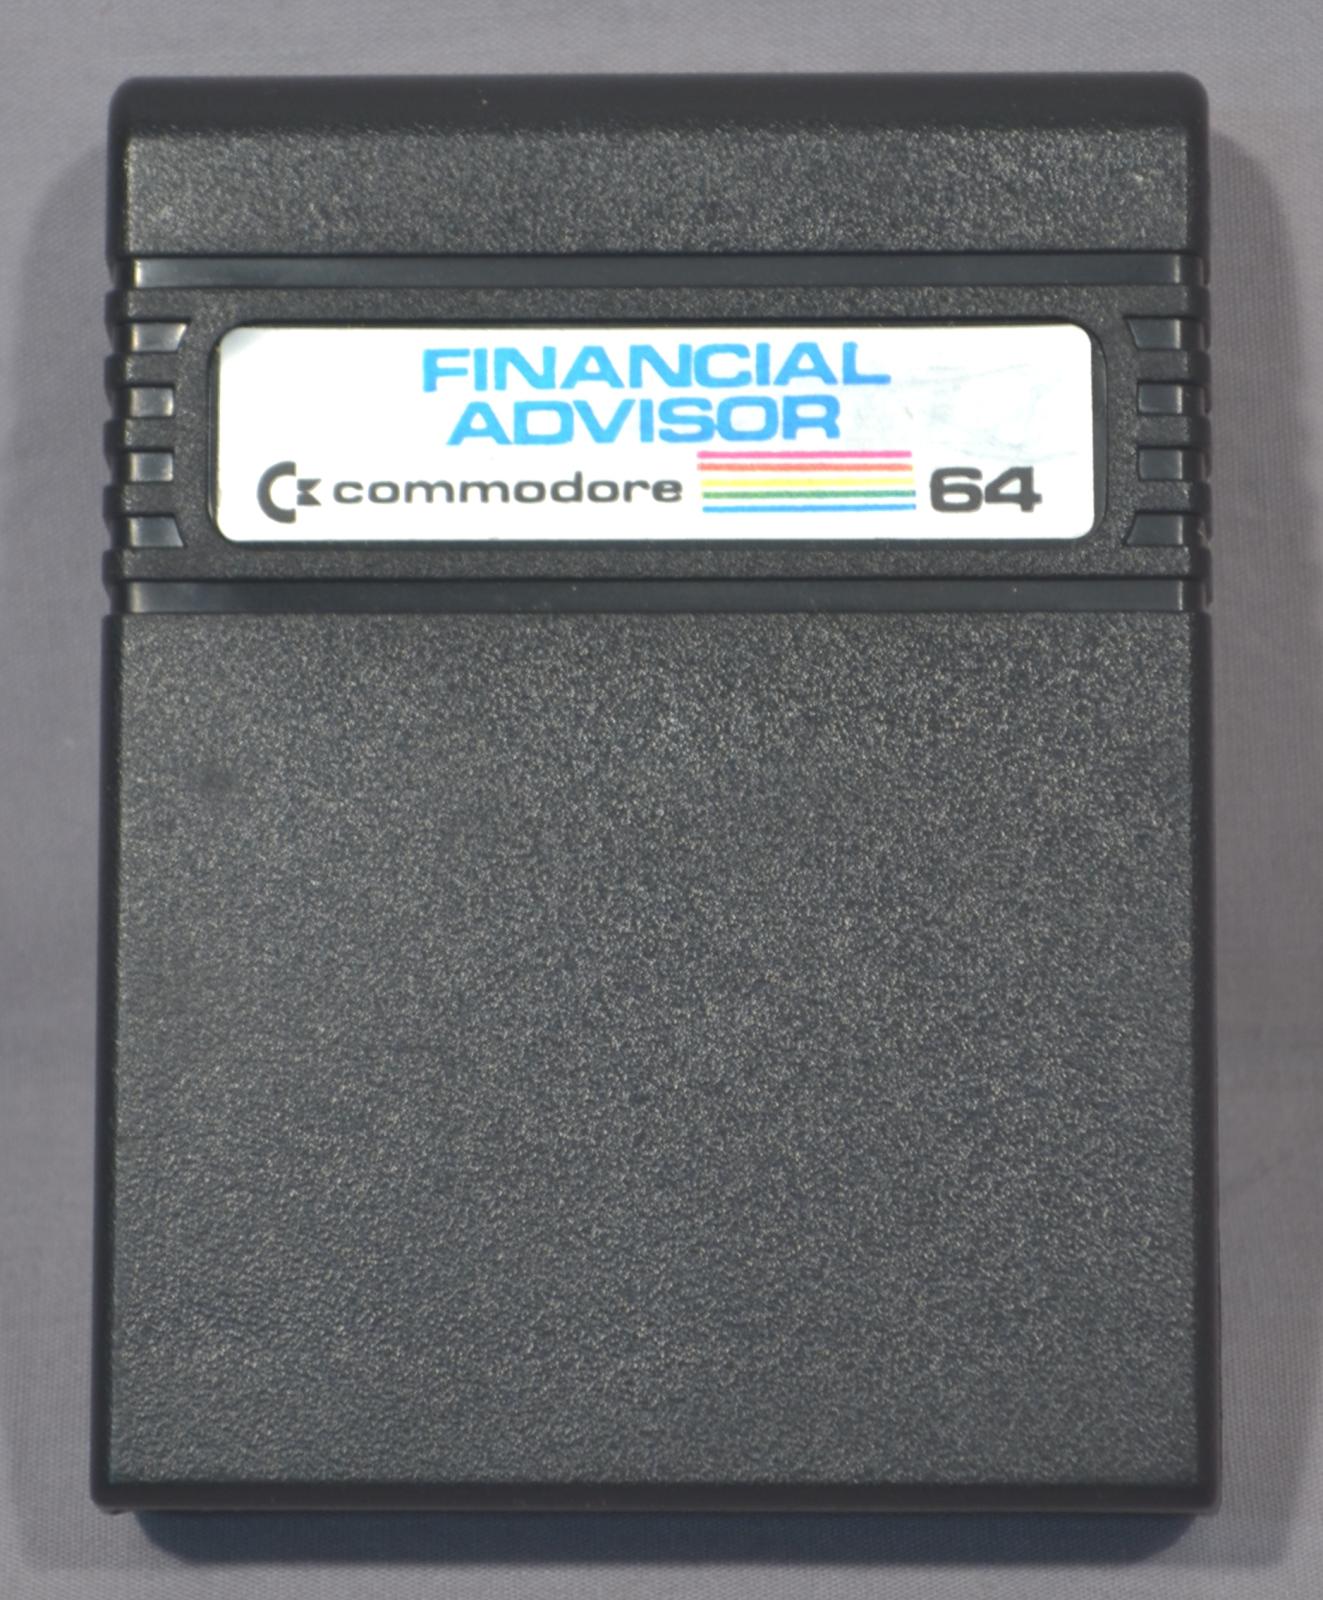 Black rectangular cartridge with a rounded top edge. 5 ridges running around the top of the cartridge, with Financial Advisor name on sticker at top